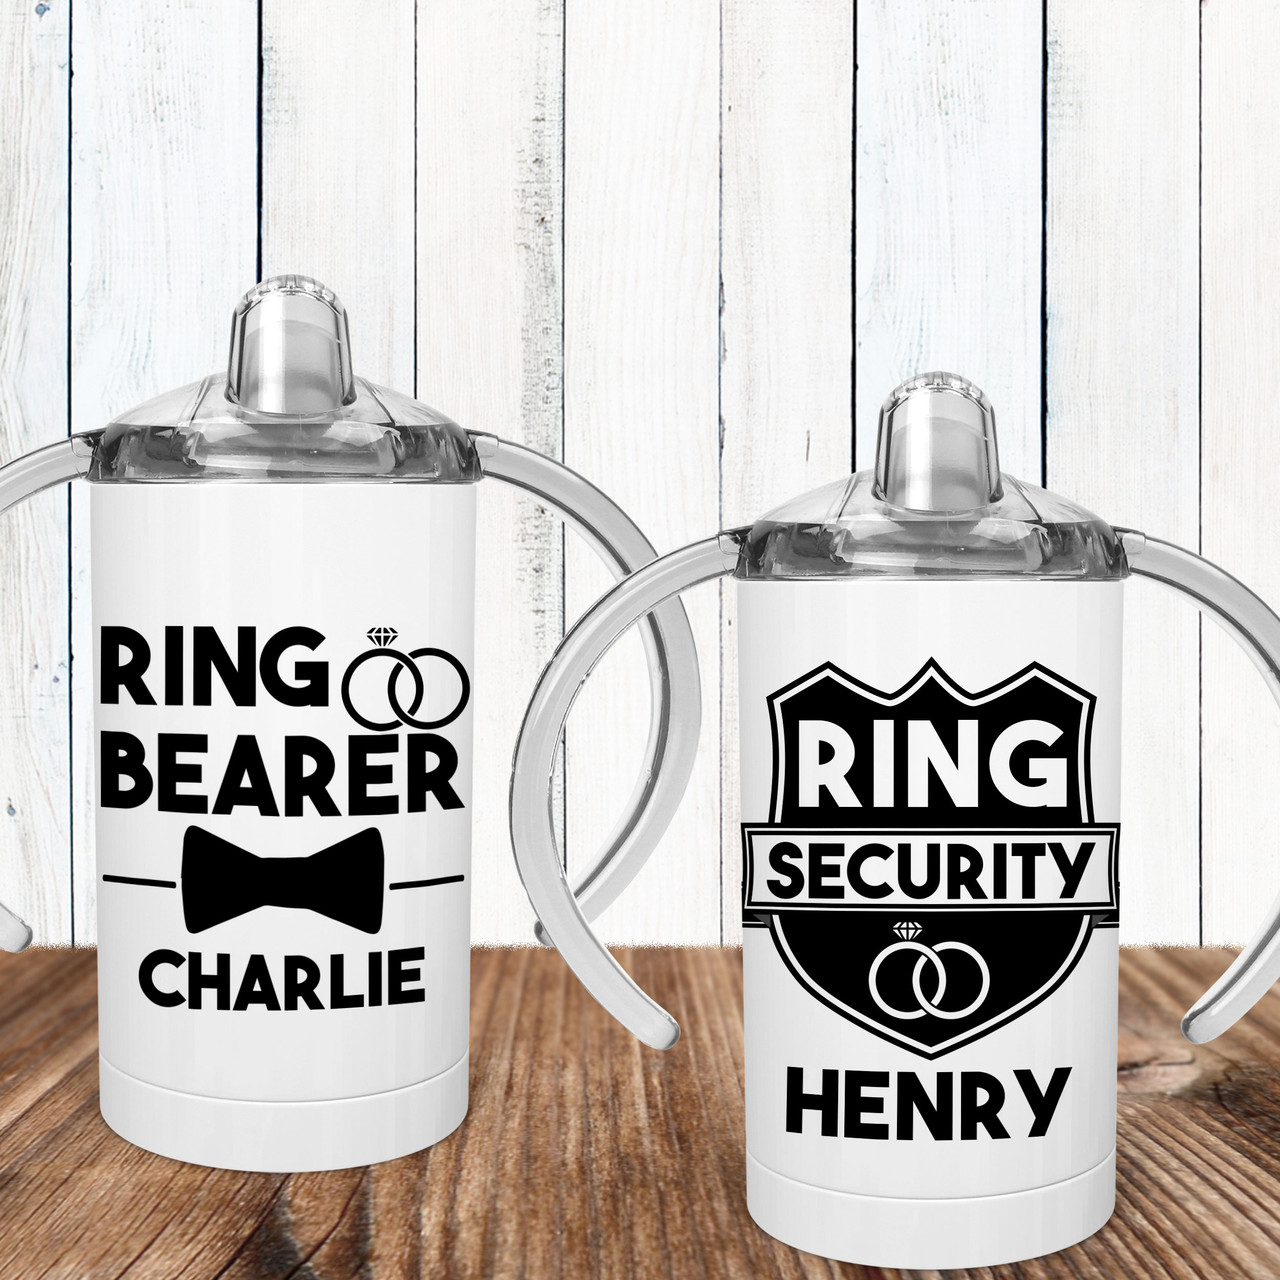 https://cdn11.bigcommerce.com/s-5grzuu6/images/stencil/1280x1280/products/5783/42612/Ring-Bearer_Ring-Security-Sippy-Cups_with_Names__58906.1630104086.jpg?c=2